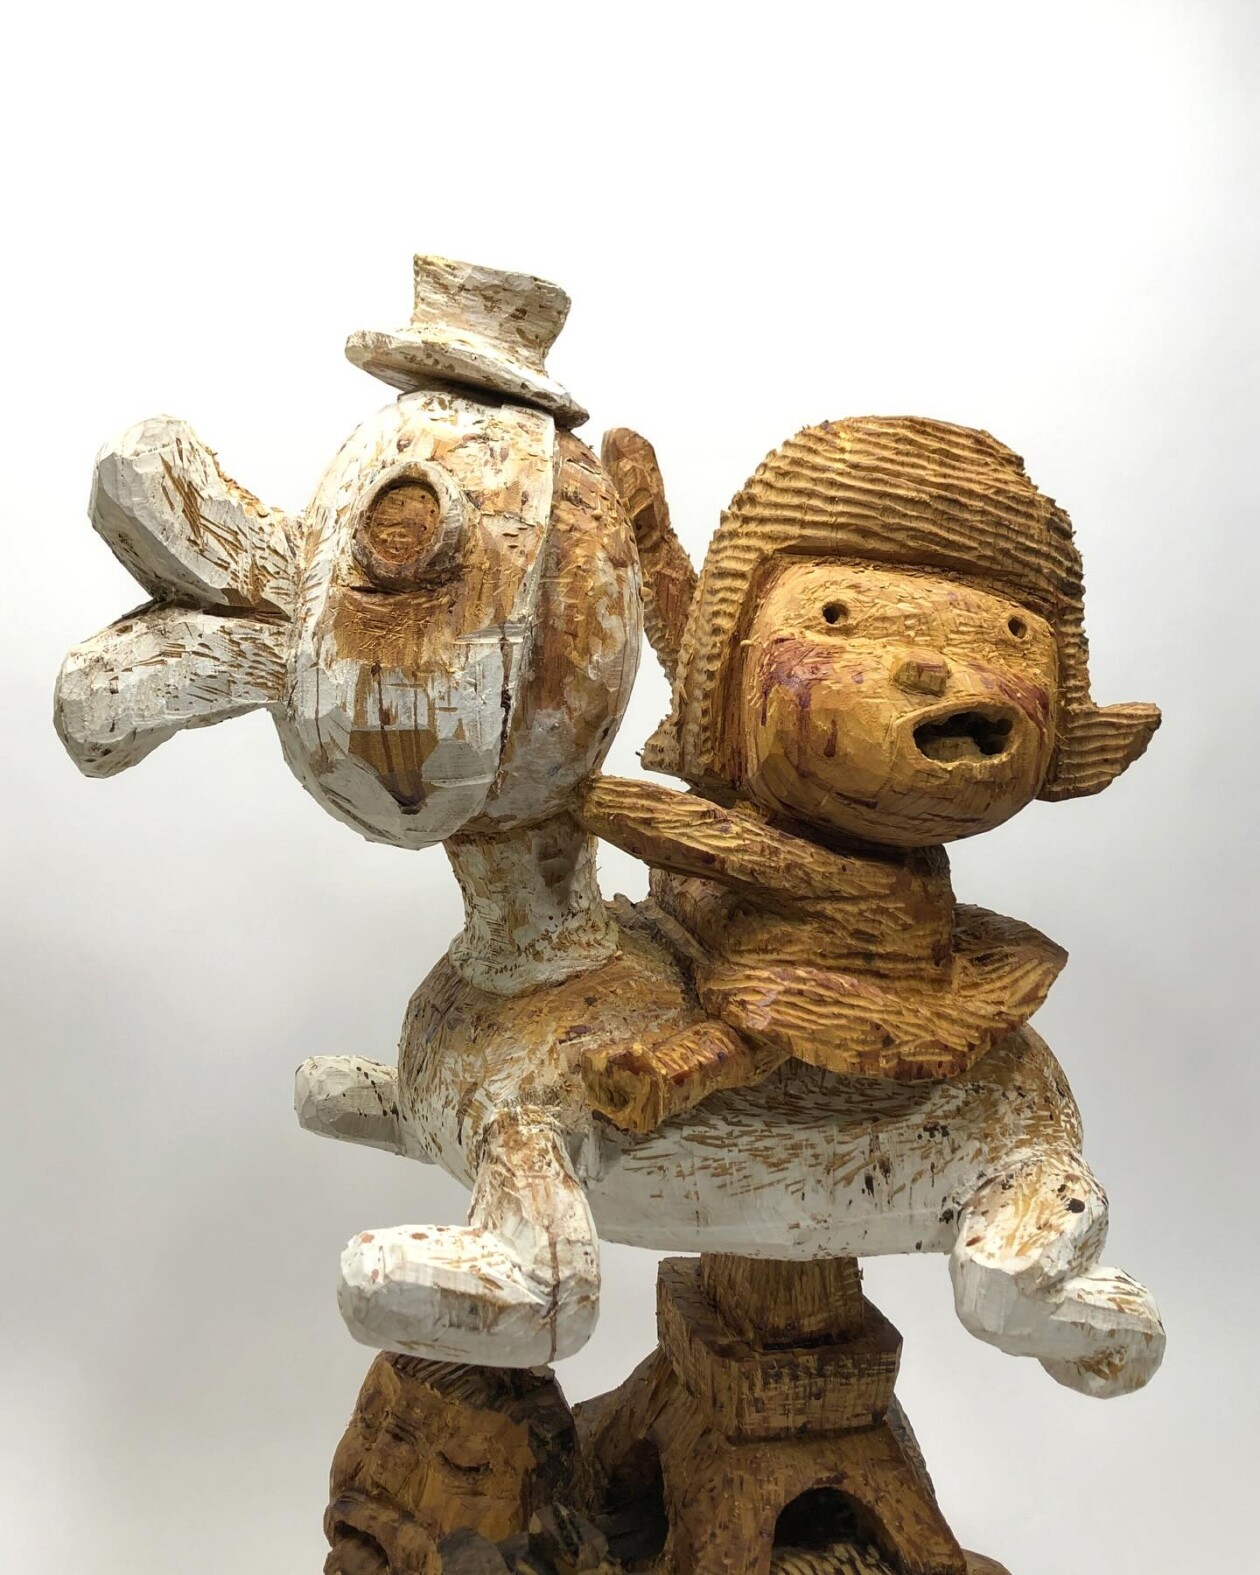 The Enchanting World Of Hirosuke Yabe's Wooden Beings (8)